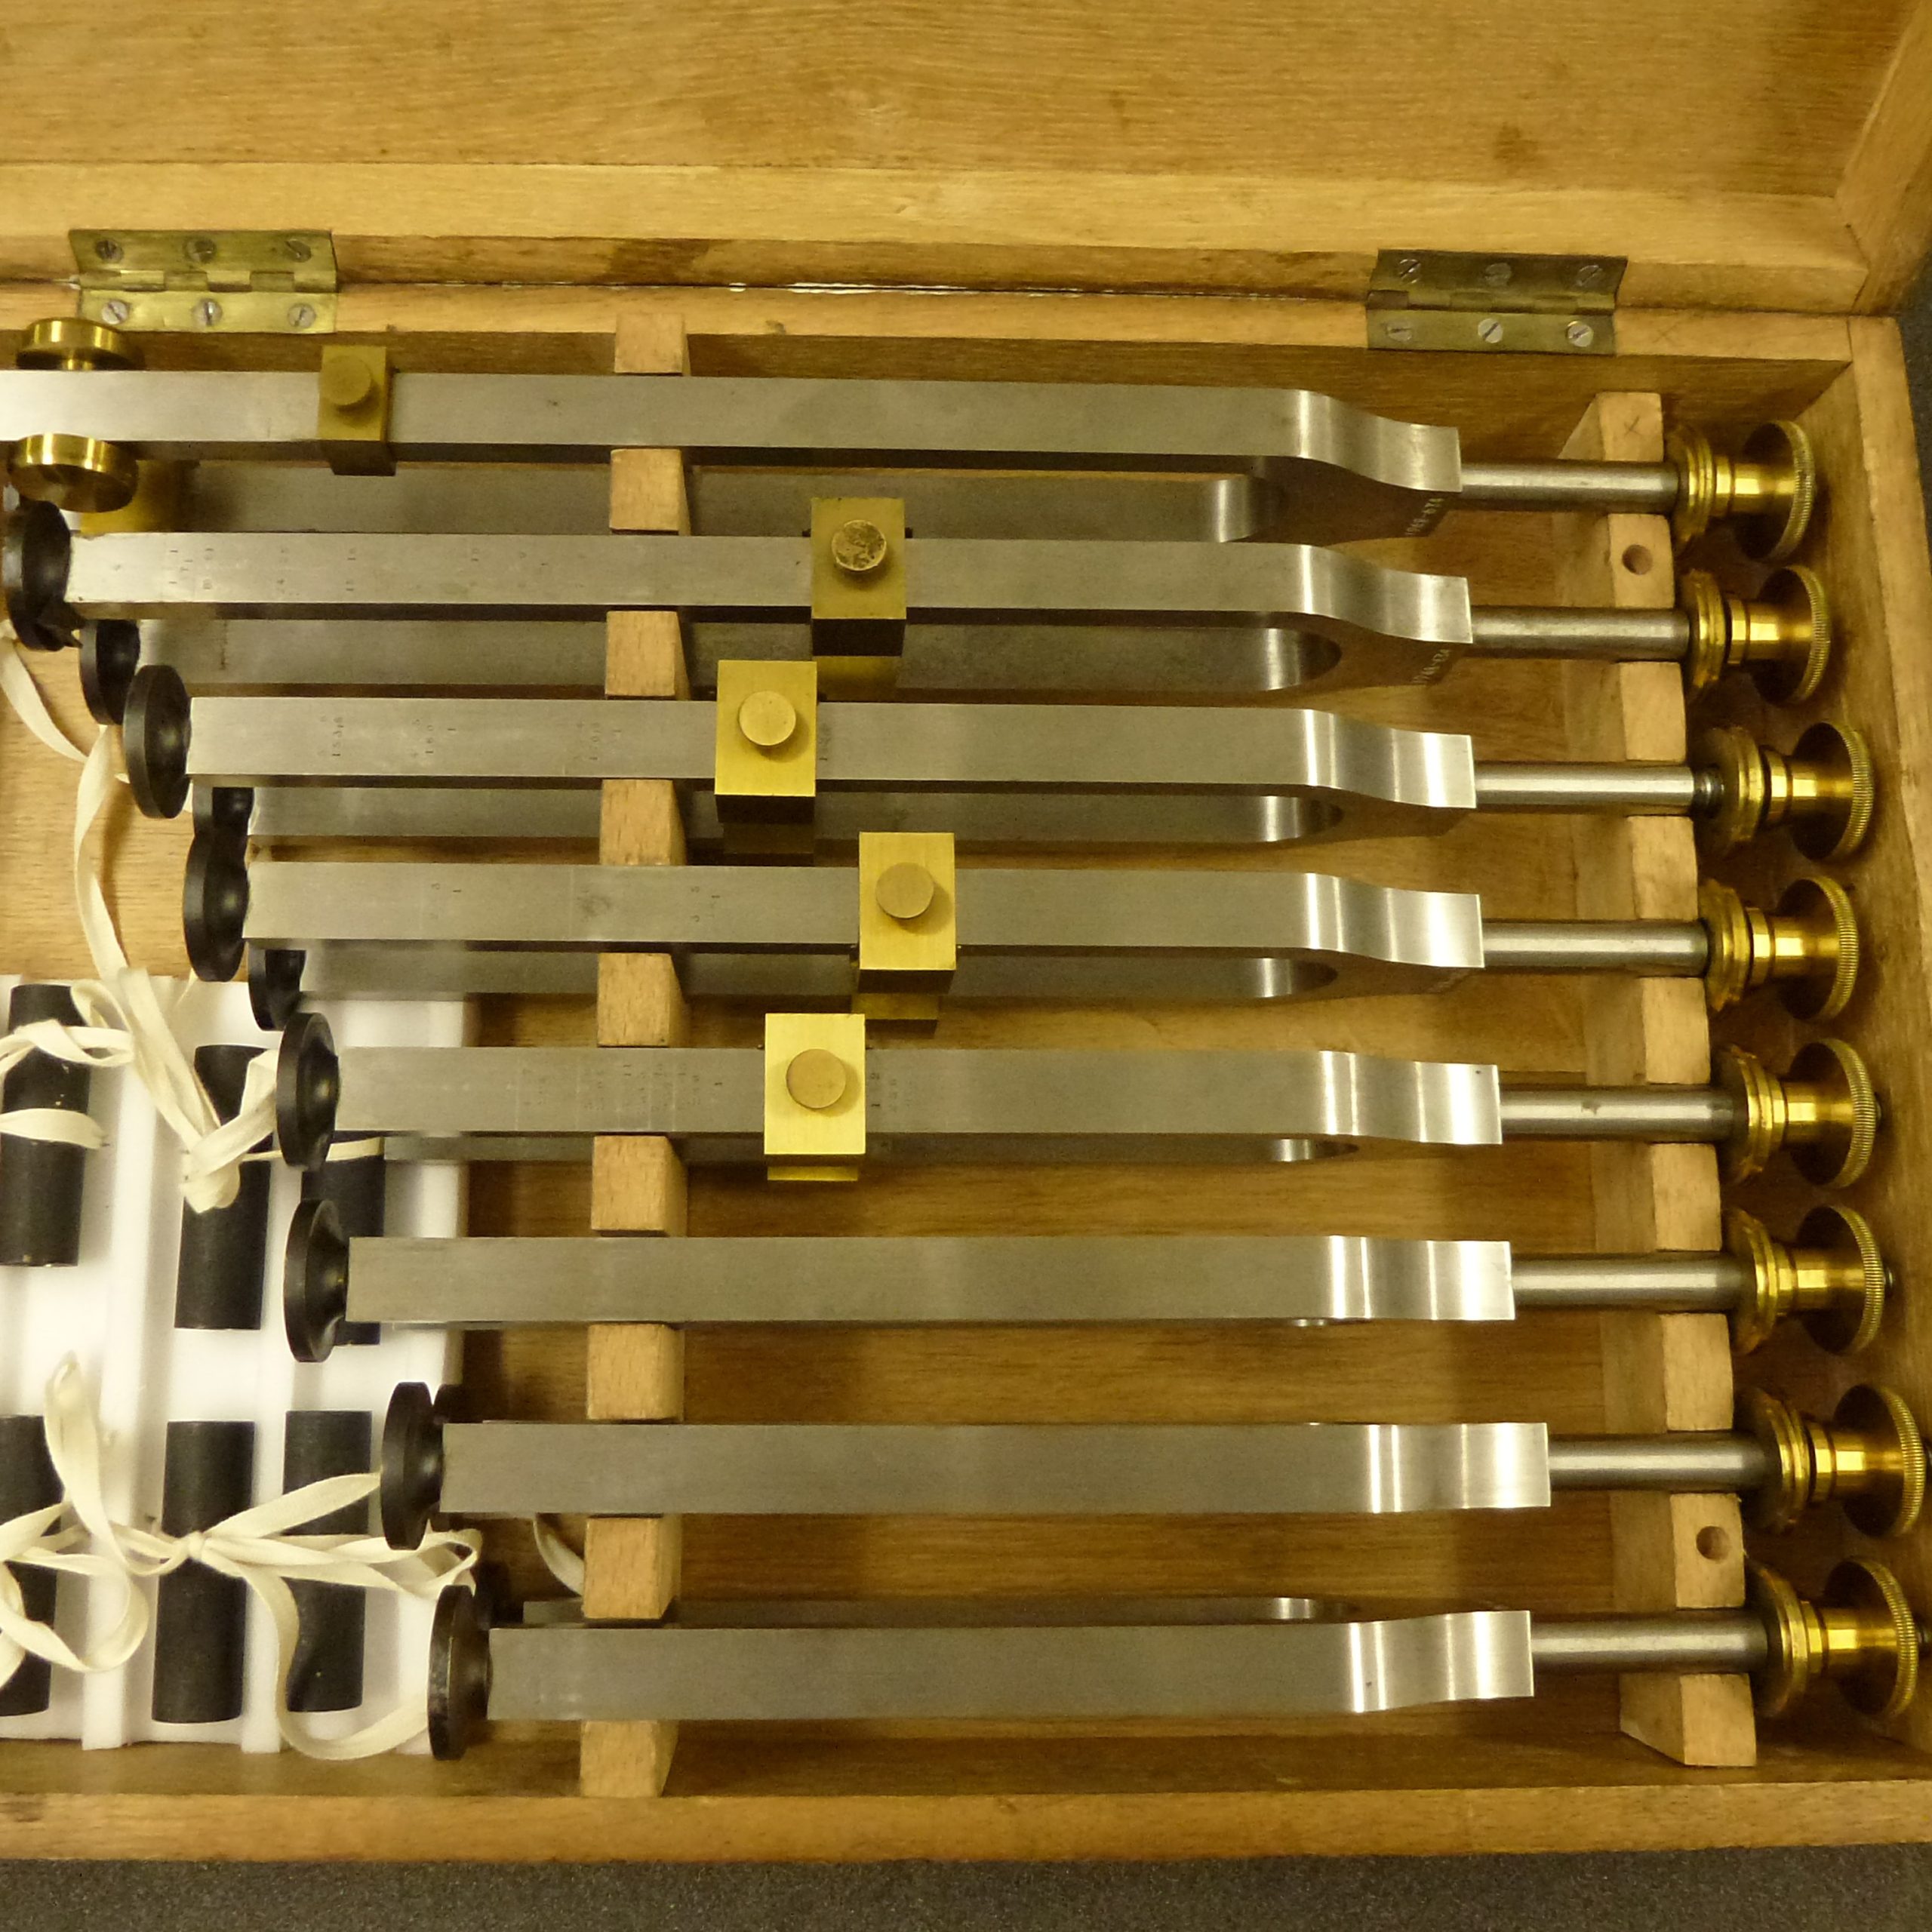 Eight tuning forks made by Dr. R. Koenig